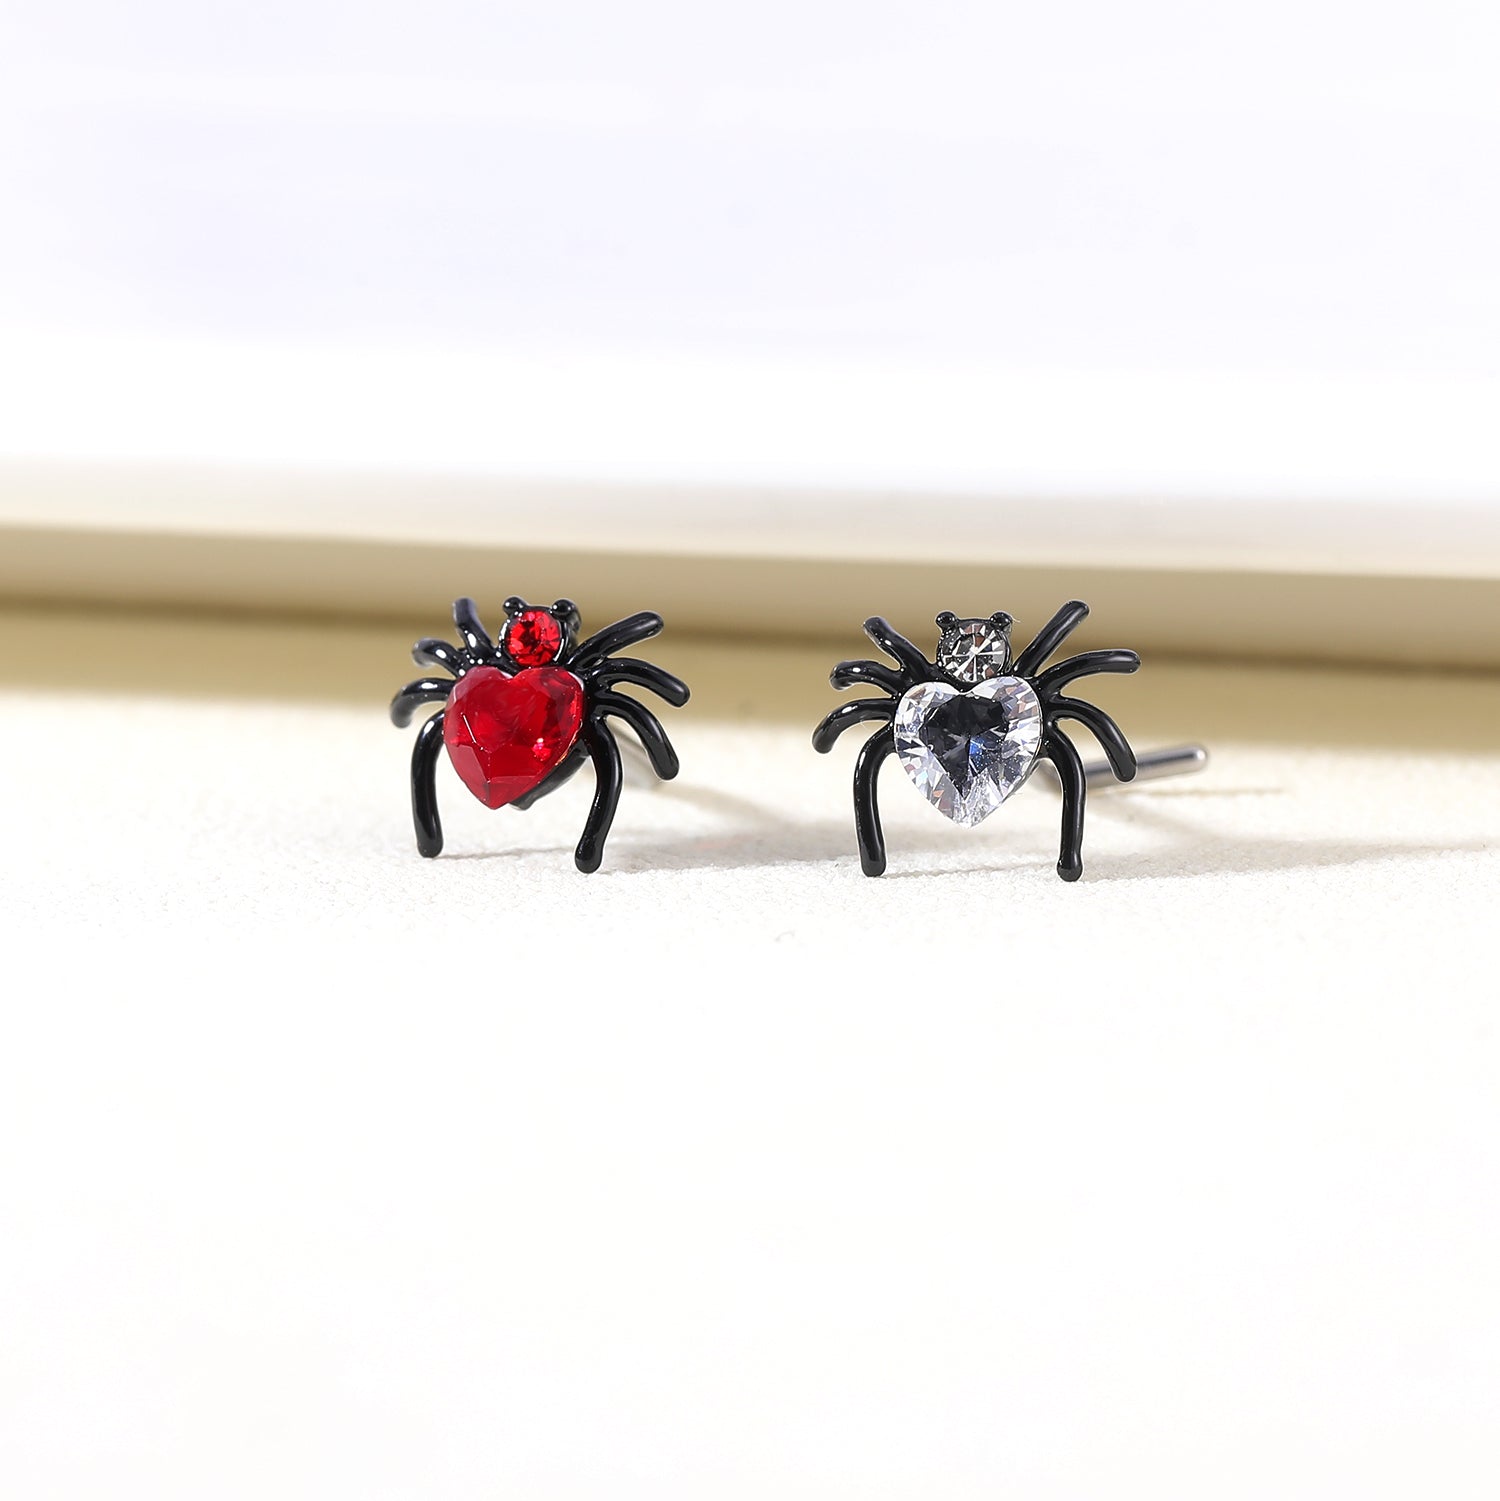 20G-White-Red-Zircon-Nose-Studs-Piercing-L-Shape-Spider-Nose-Rings-Stainless-Steel-Nostril-Piercing